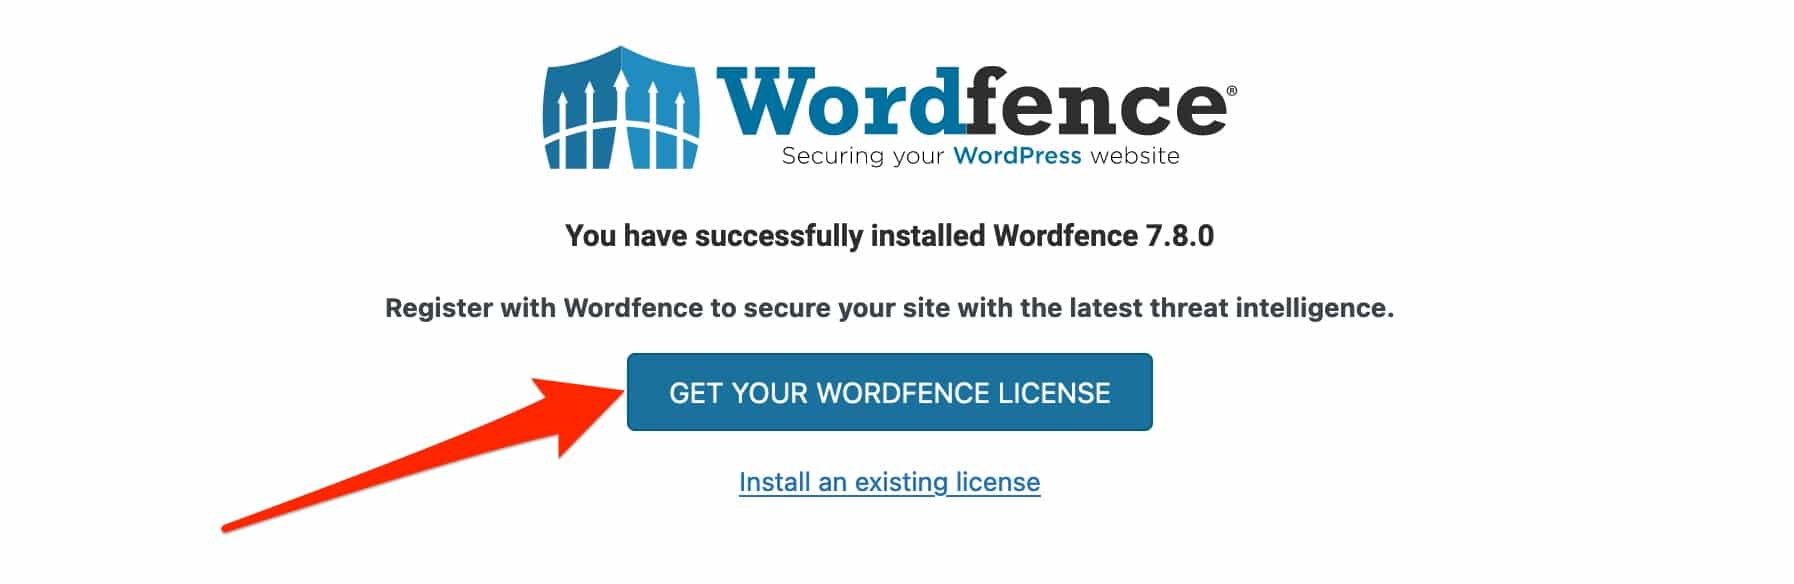 Getting a Wordfence license.